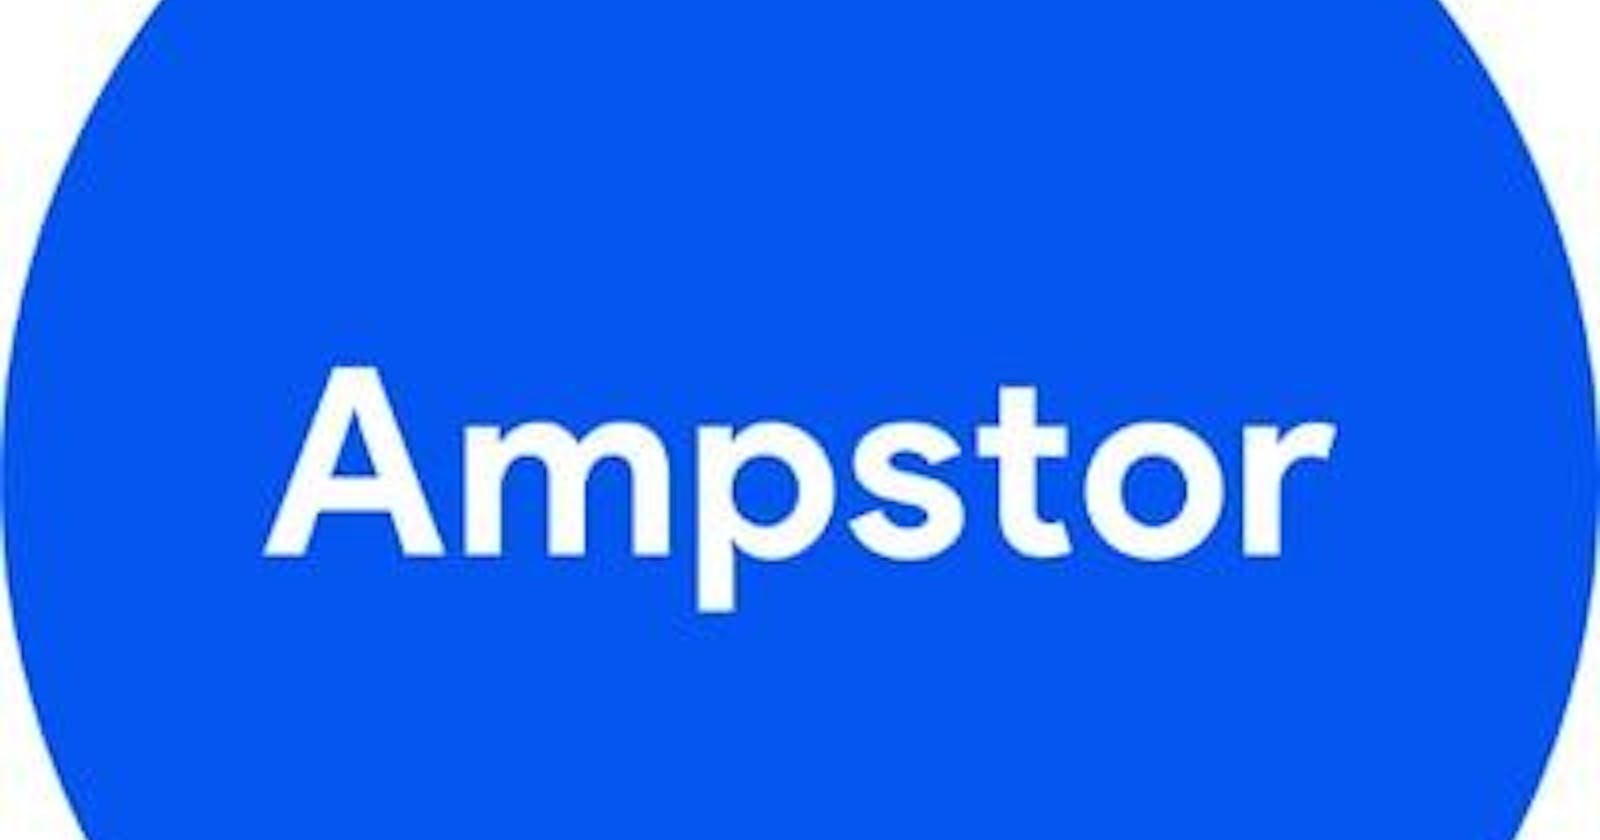 Ampstor, a NoCode Story-telling tool